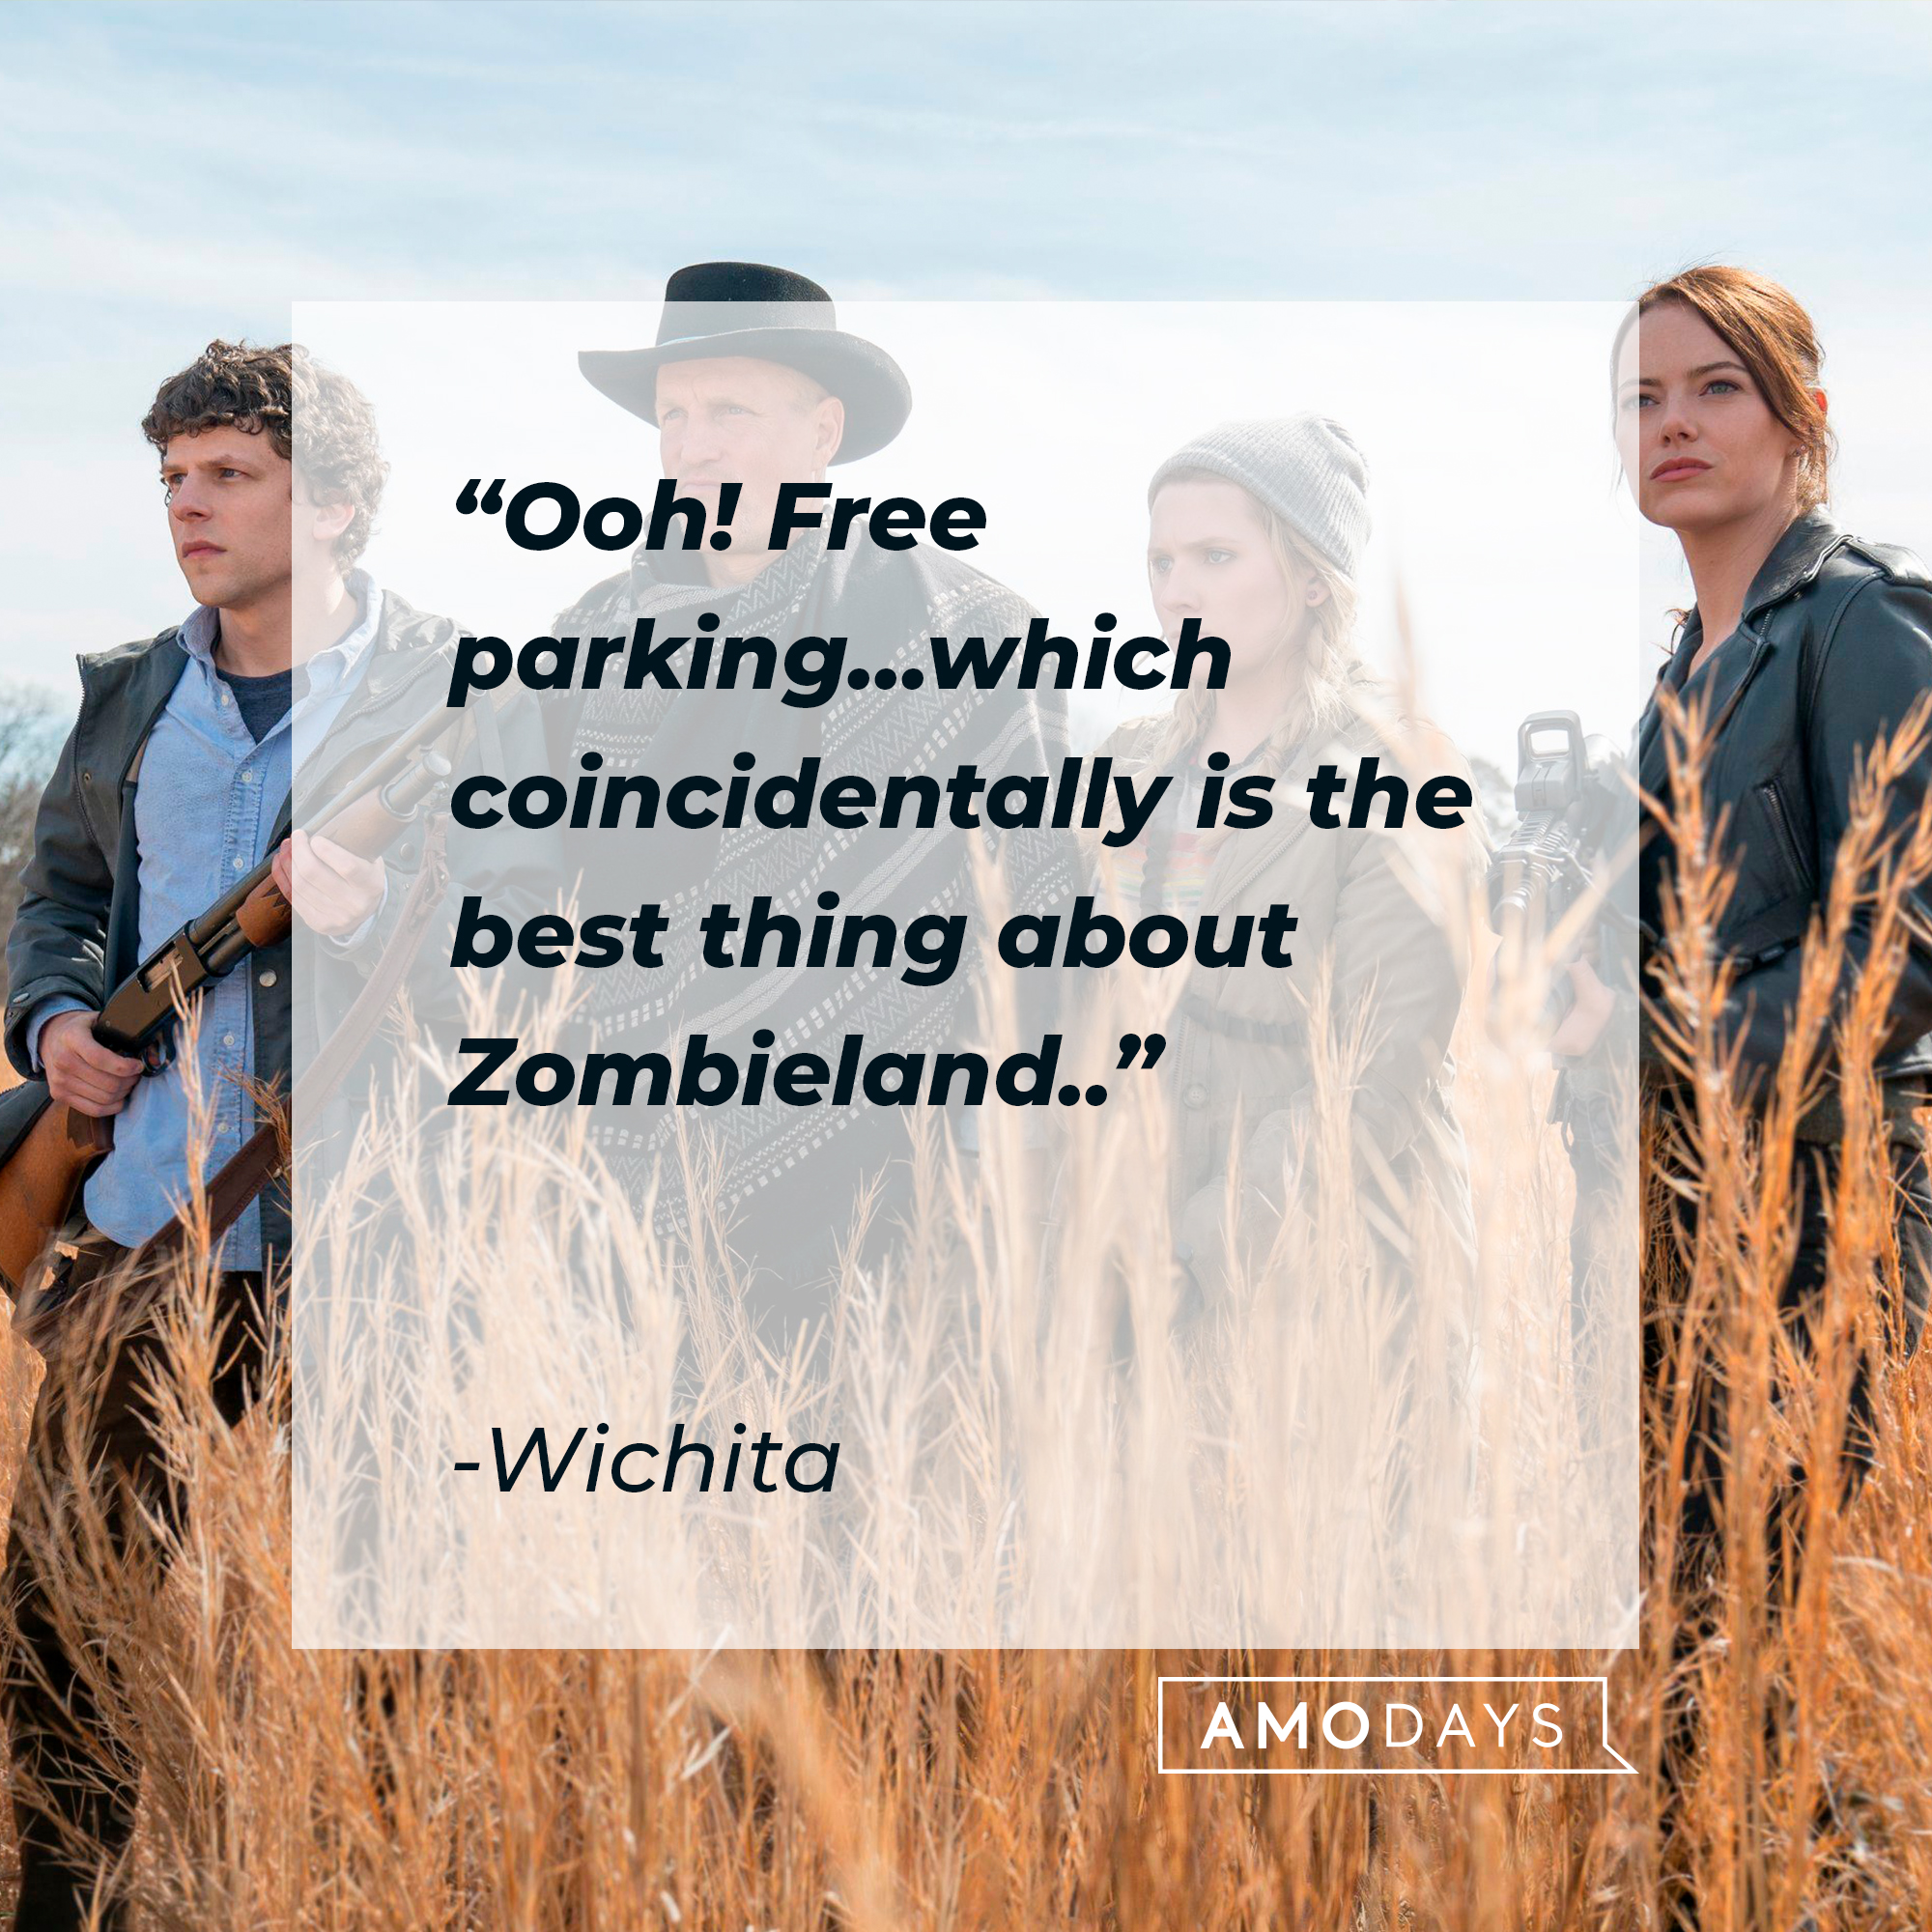 Wichita's quote: "Ooh! Free parking...which coincidentally is the best thing about Zombieland.." | Source: Facebook.com/Zombieland